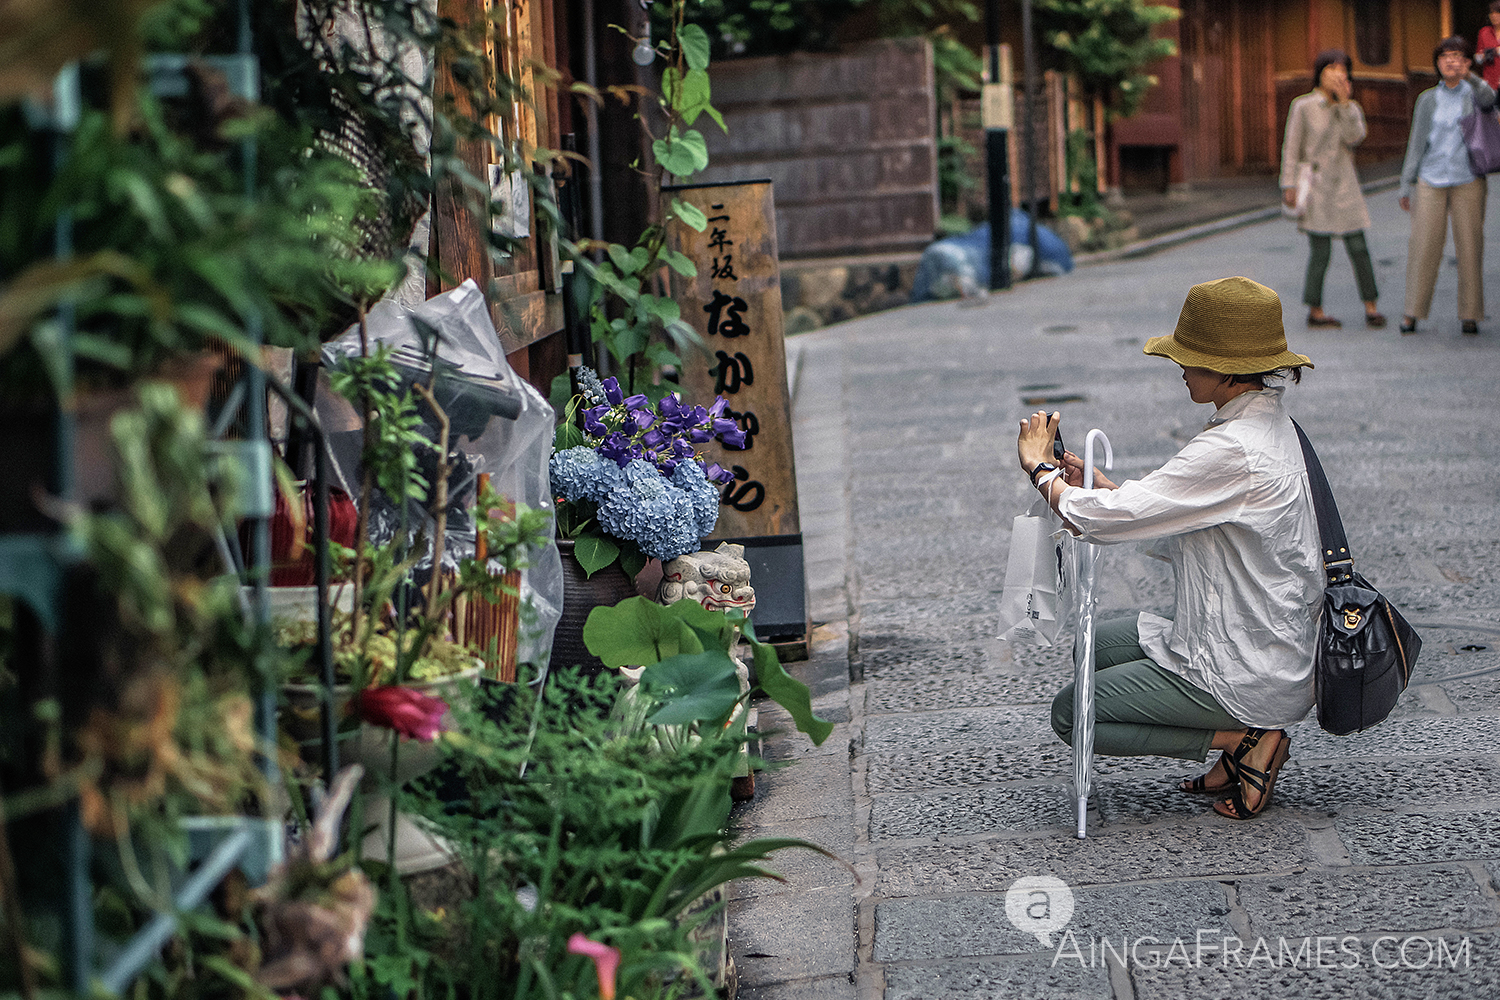 Higashiyama is a popular destination in Kyoto, it is one of the few places where the traditional streetscape of the Edo period is neatly preserved. The streets of Higashiyama are lined with lovely Japanese style houses, small teahouses, and charming boutiques.